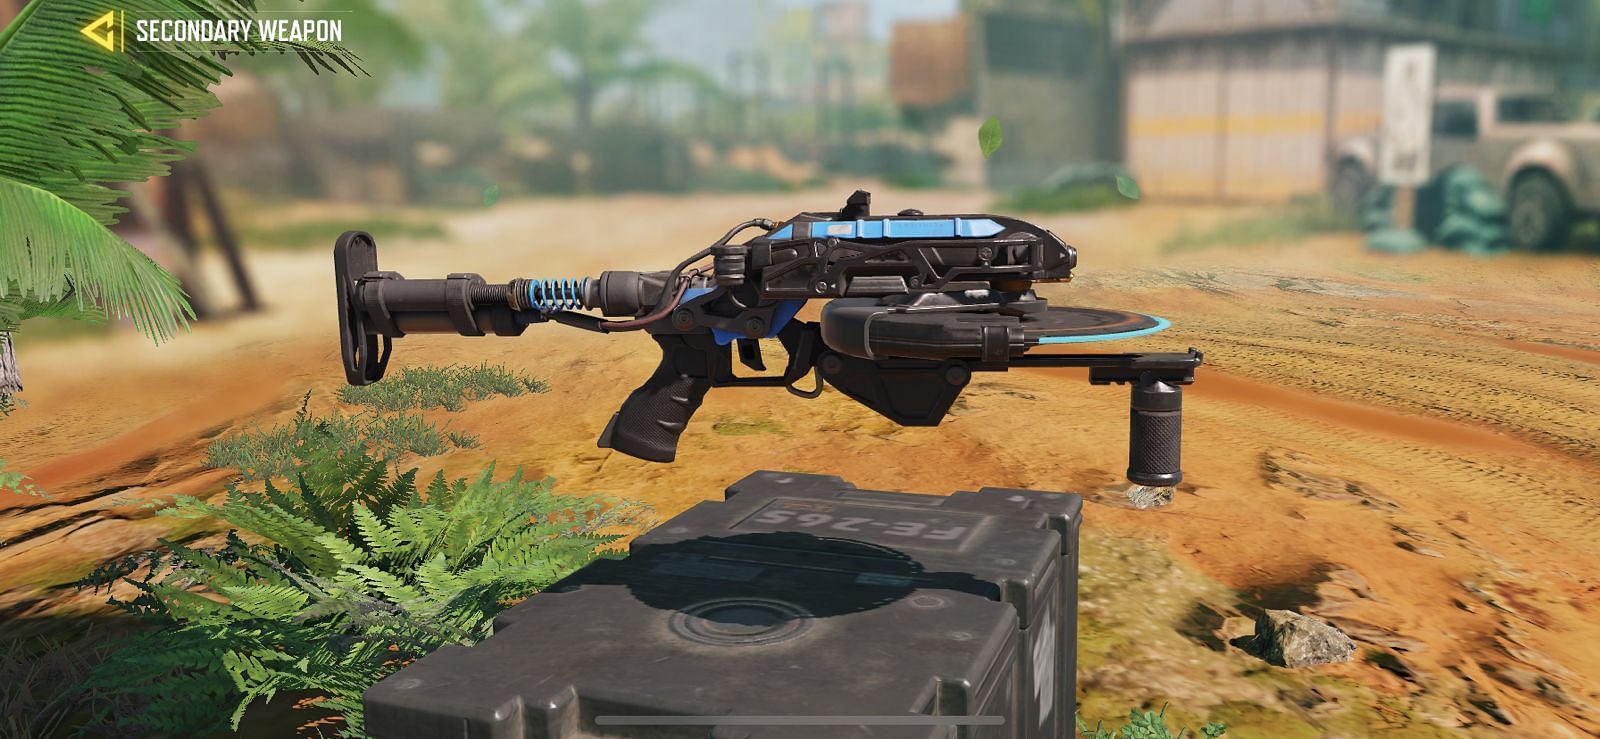 D13-Sector, the newest secondary weapon, has been added to COD Mobile and players can unlock it easily from Seasonal events (Image via COD Mobile)